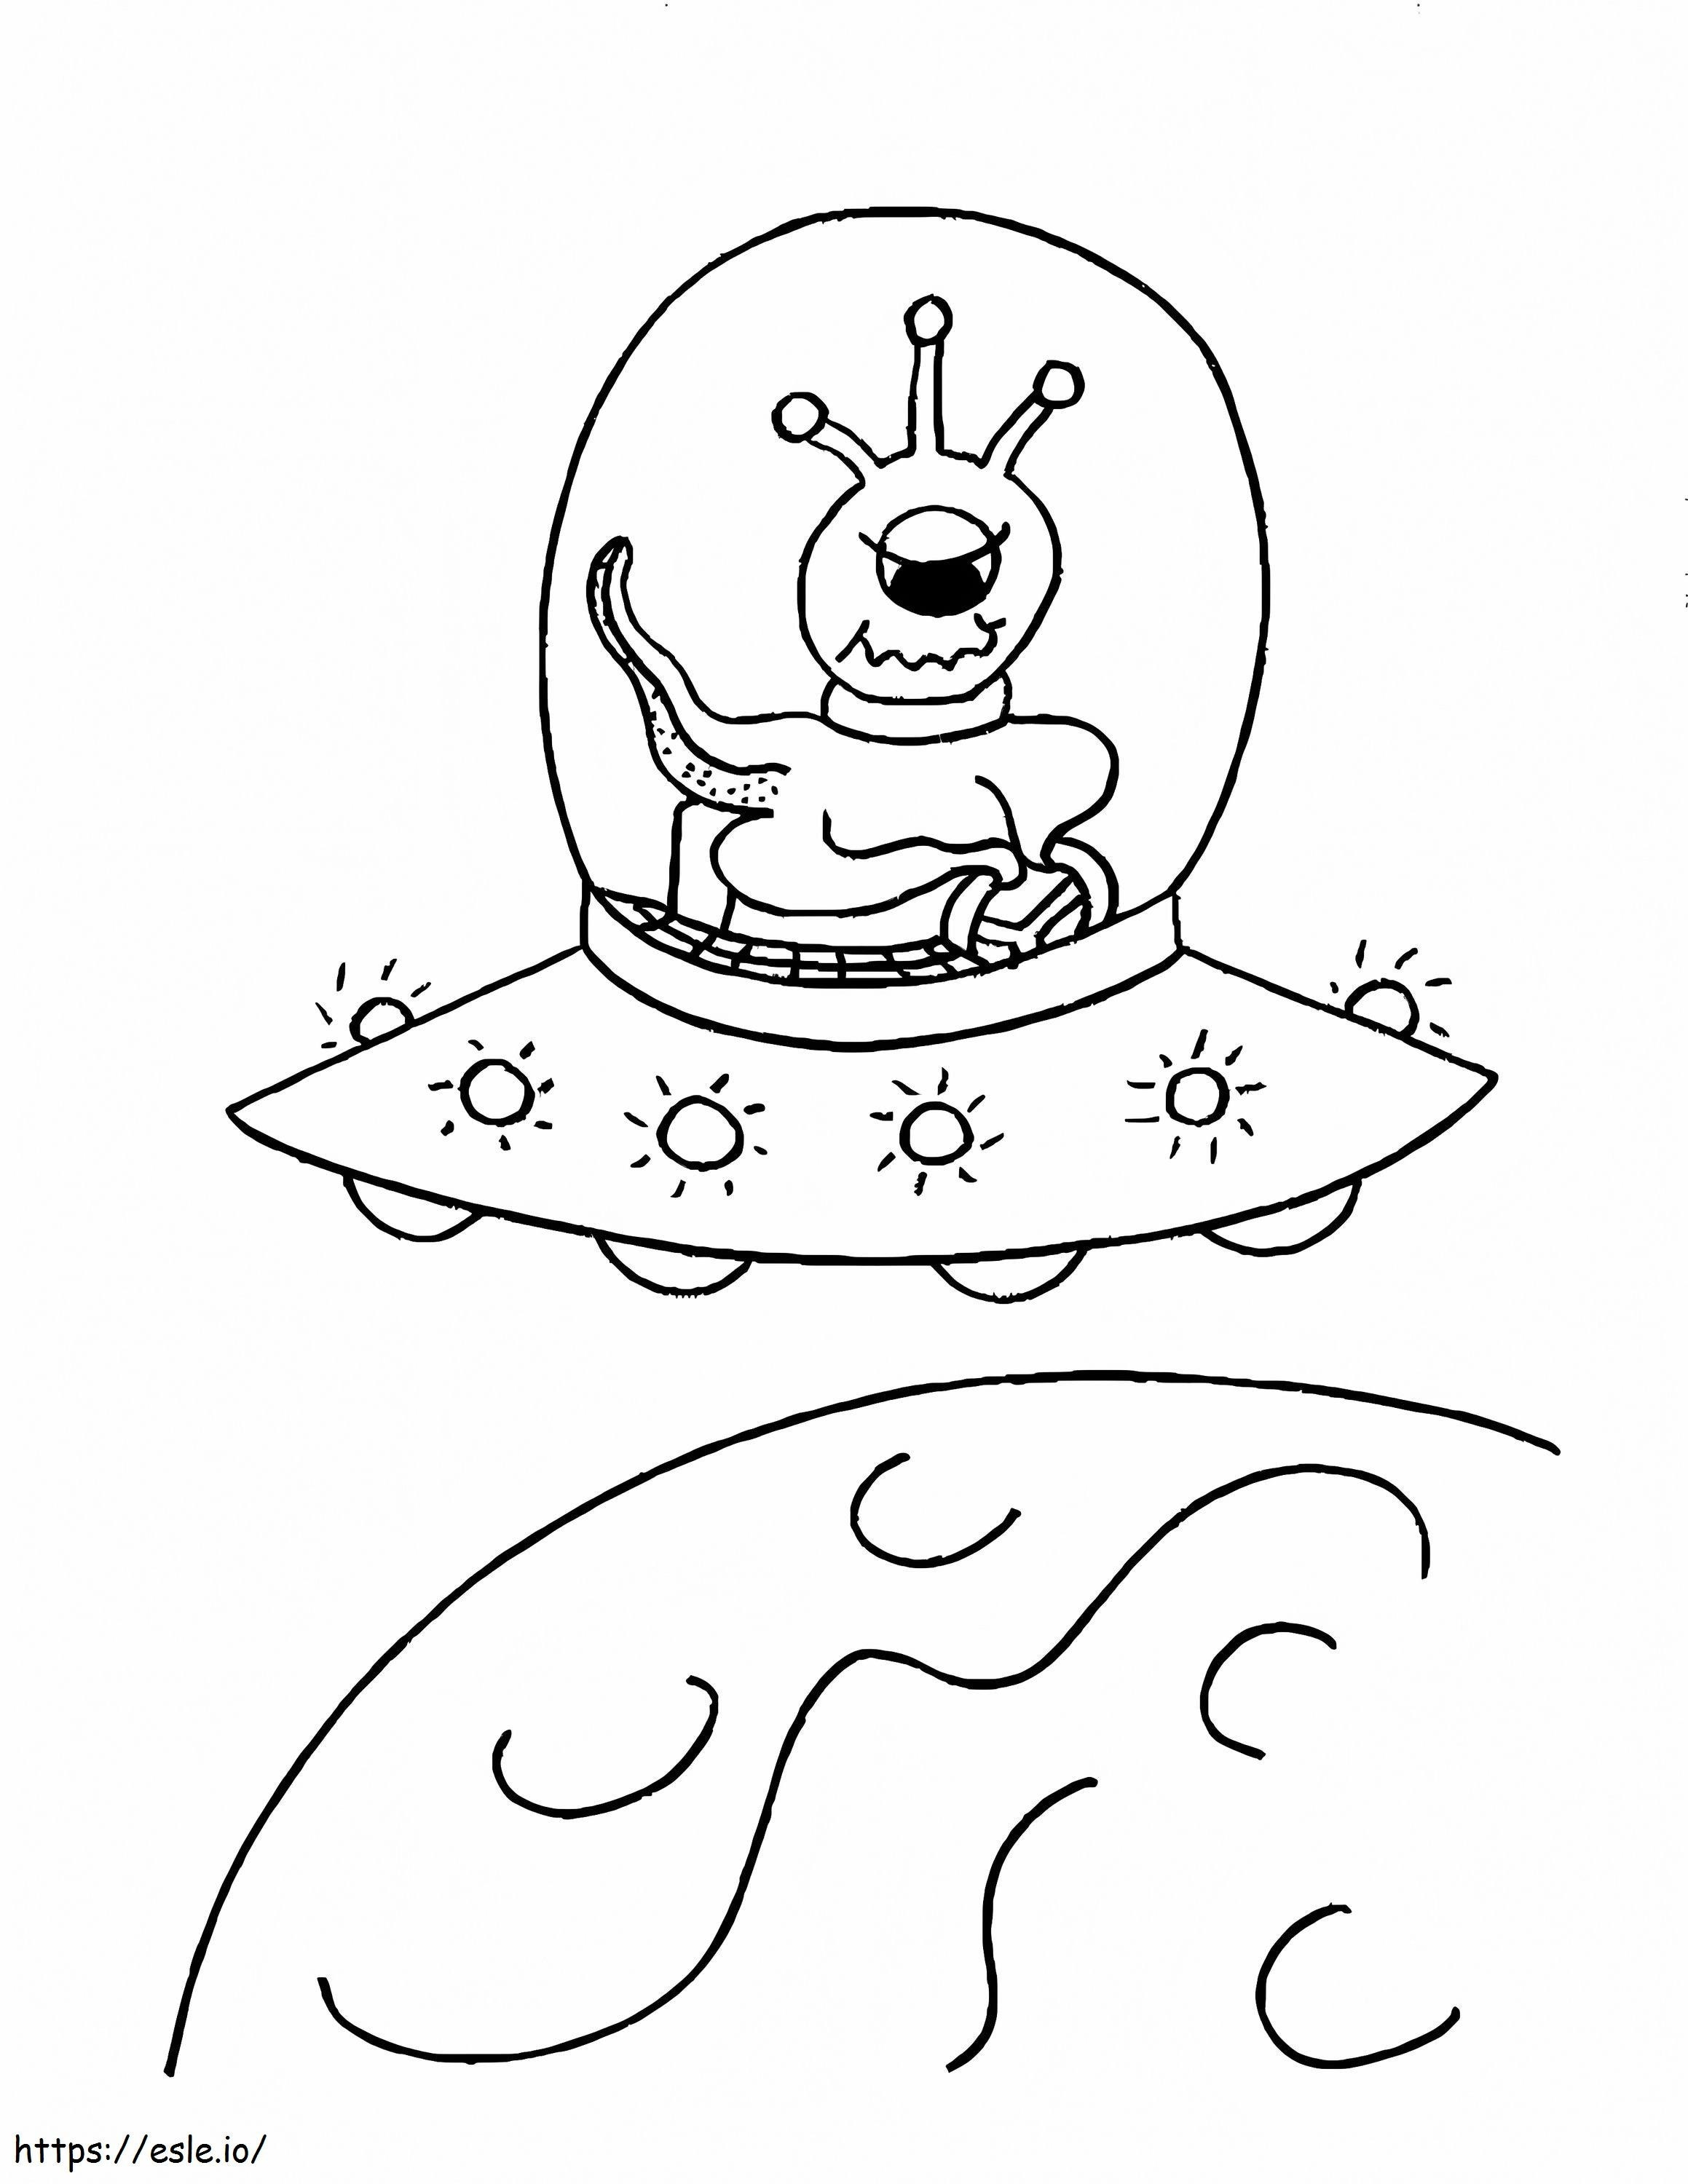 Alien In The Space coloring page